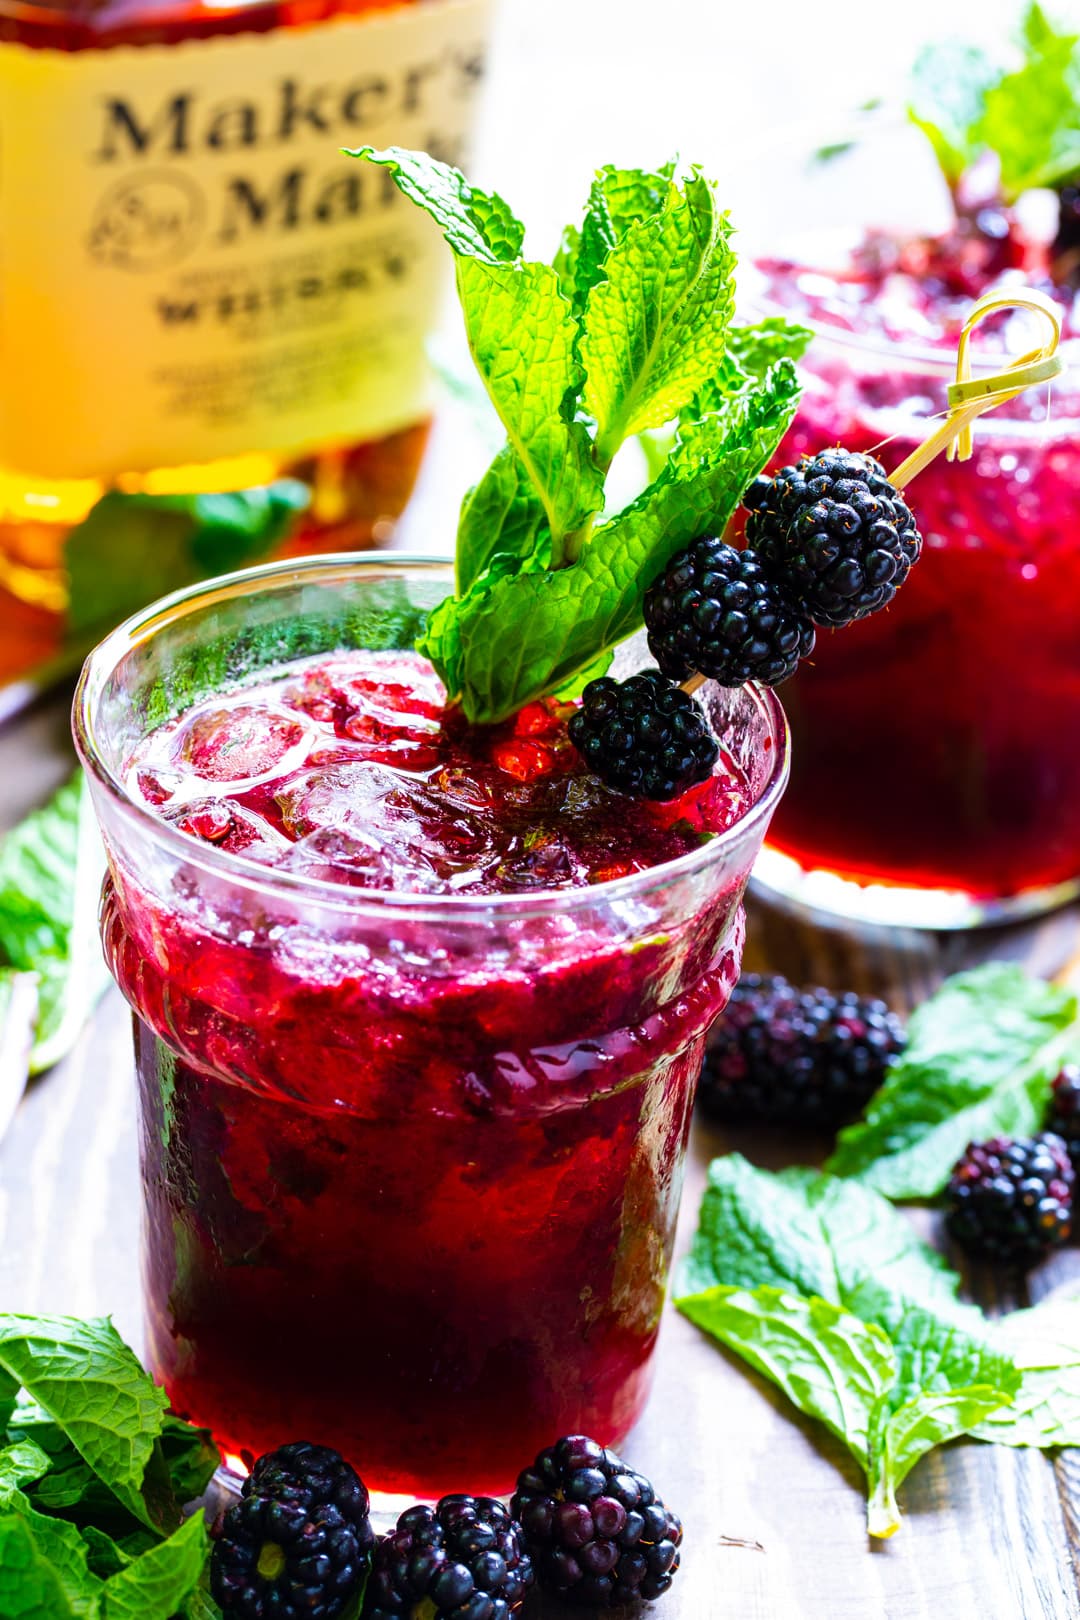 Blackberry Mint Julep in a glass surrounded by fresh mint and blackberries.